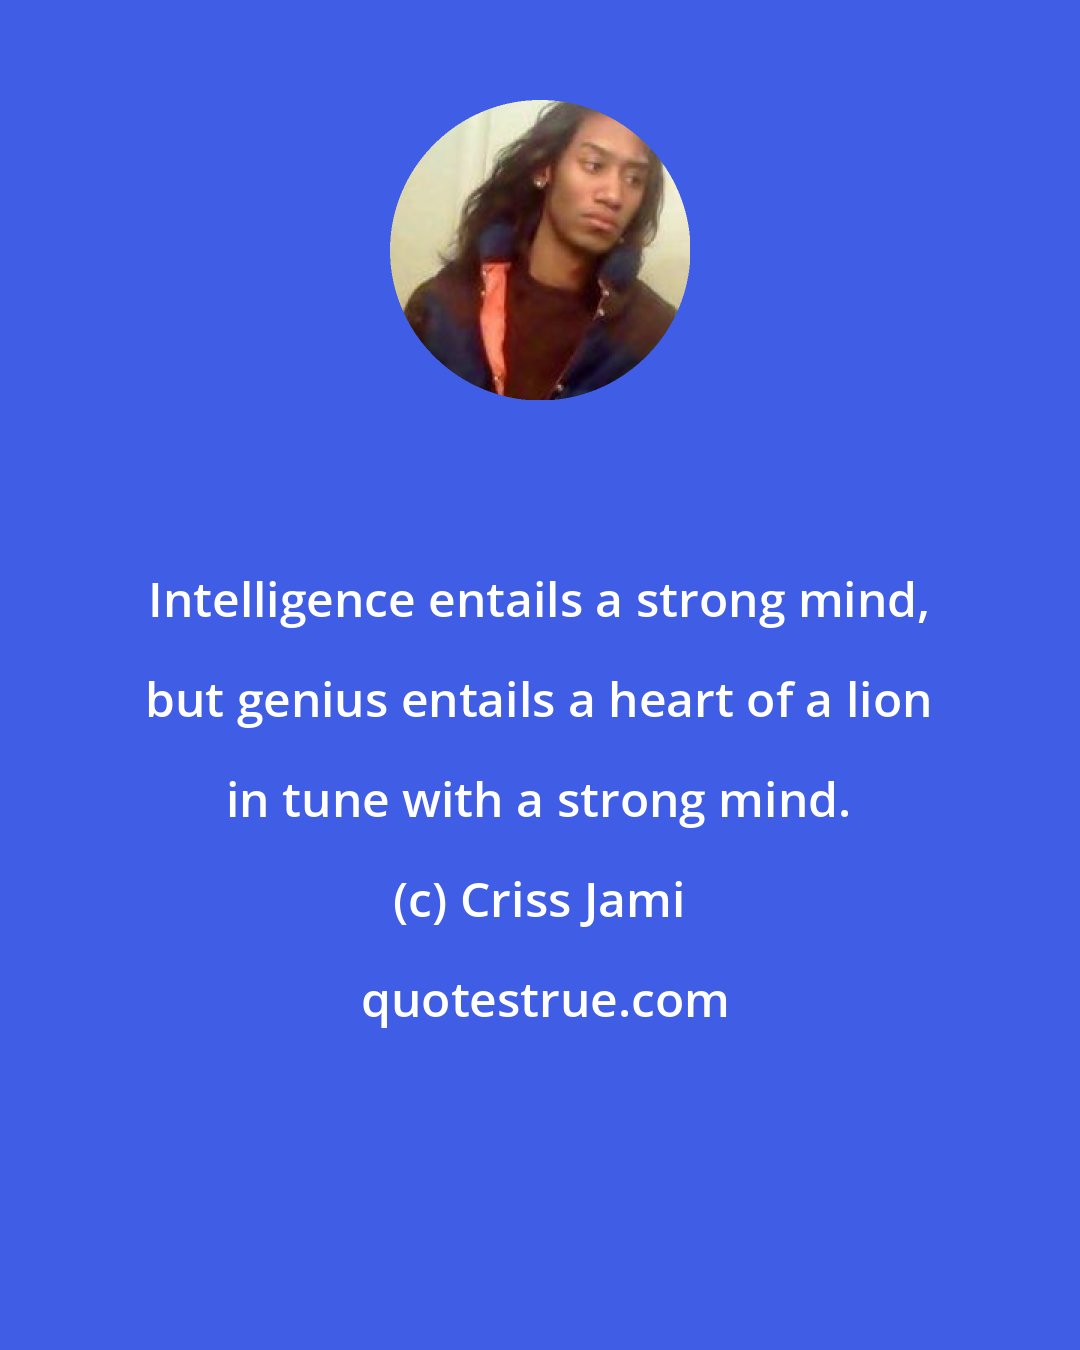 Criss Jami: Intelligence entails a strong mind, but genius entails a heart of a lion in tune with a strong mind.